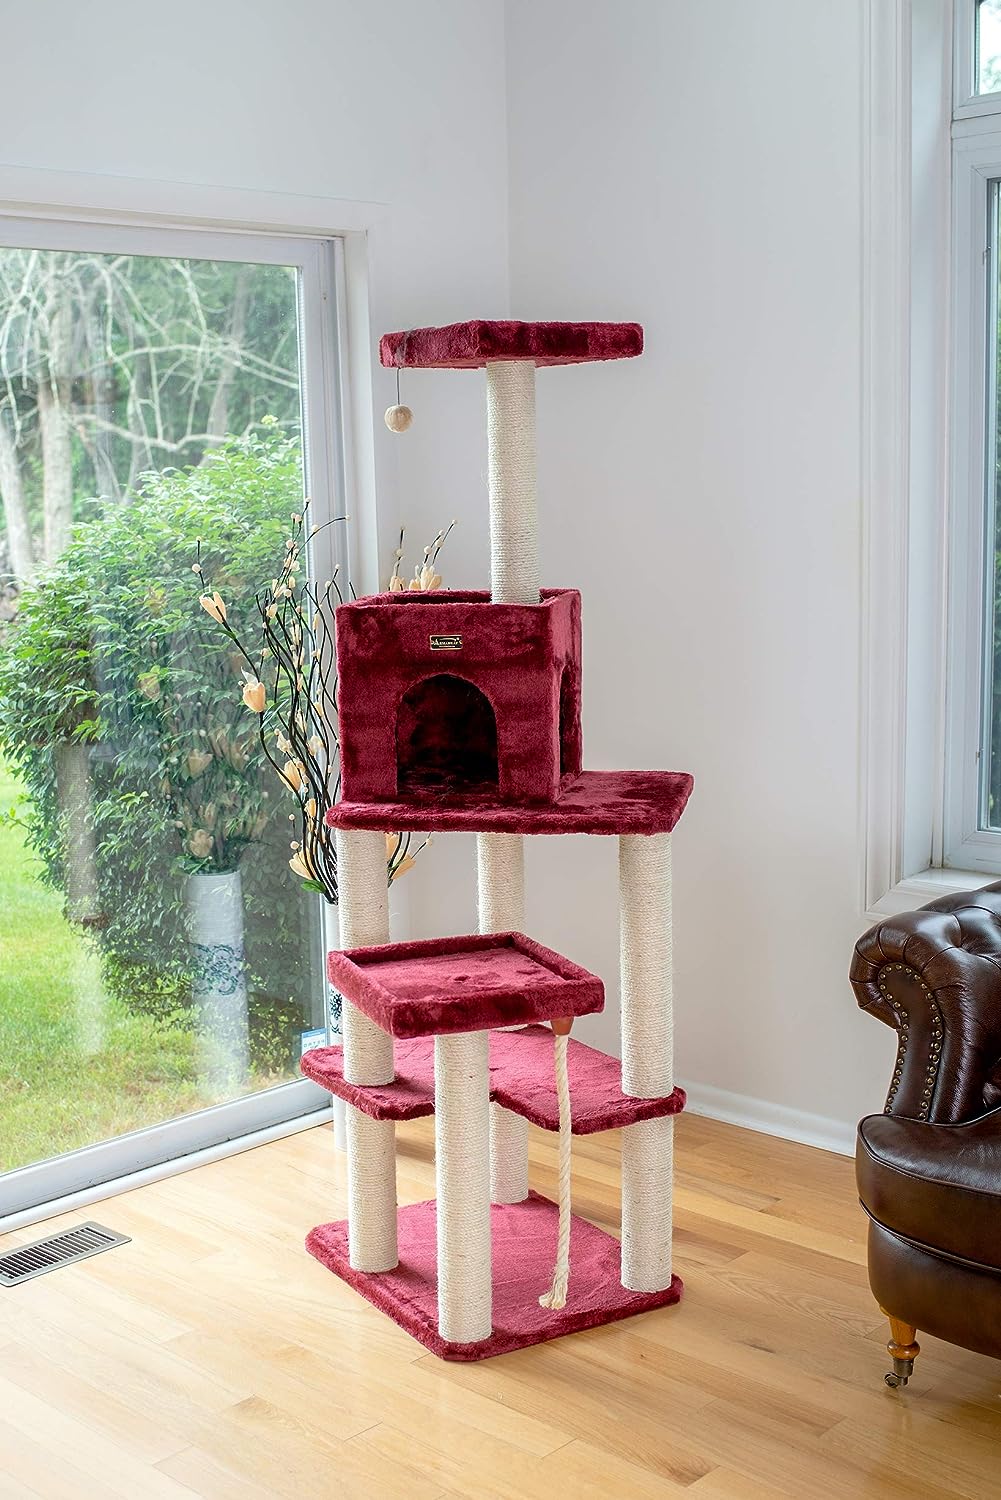 Armarkat Real Wood Cat Tower, Ultra Thick Faux Fur Covered Cat Condo House A6902B, Burgundy